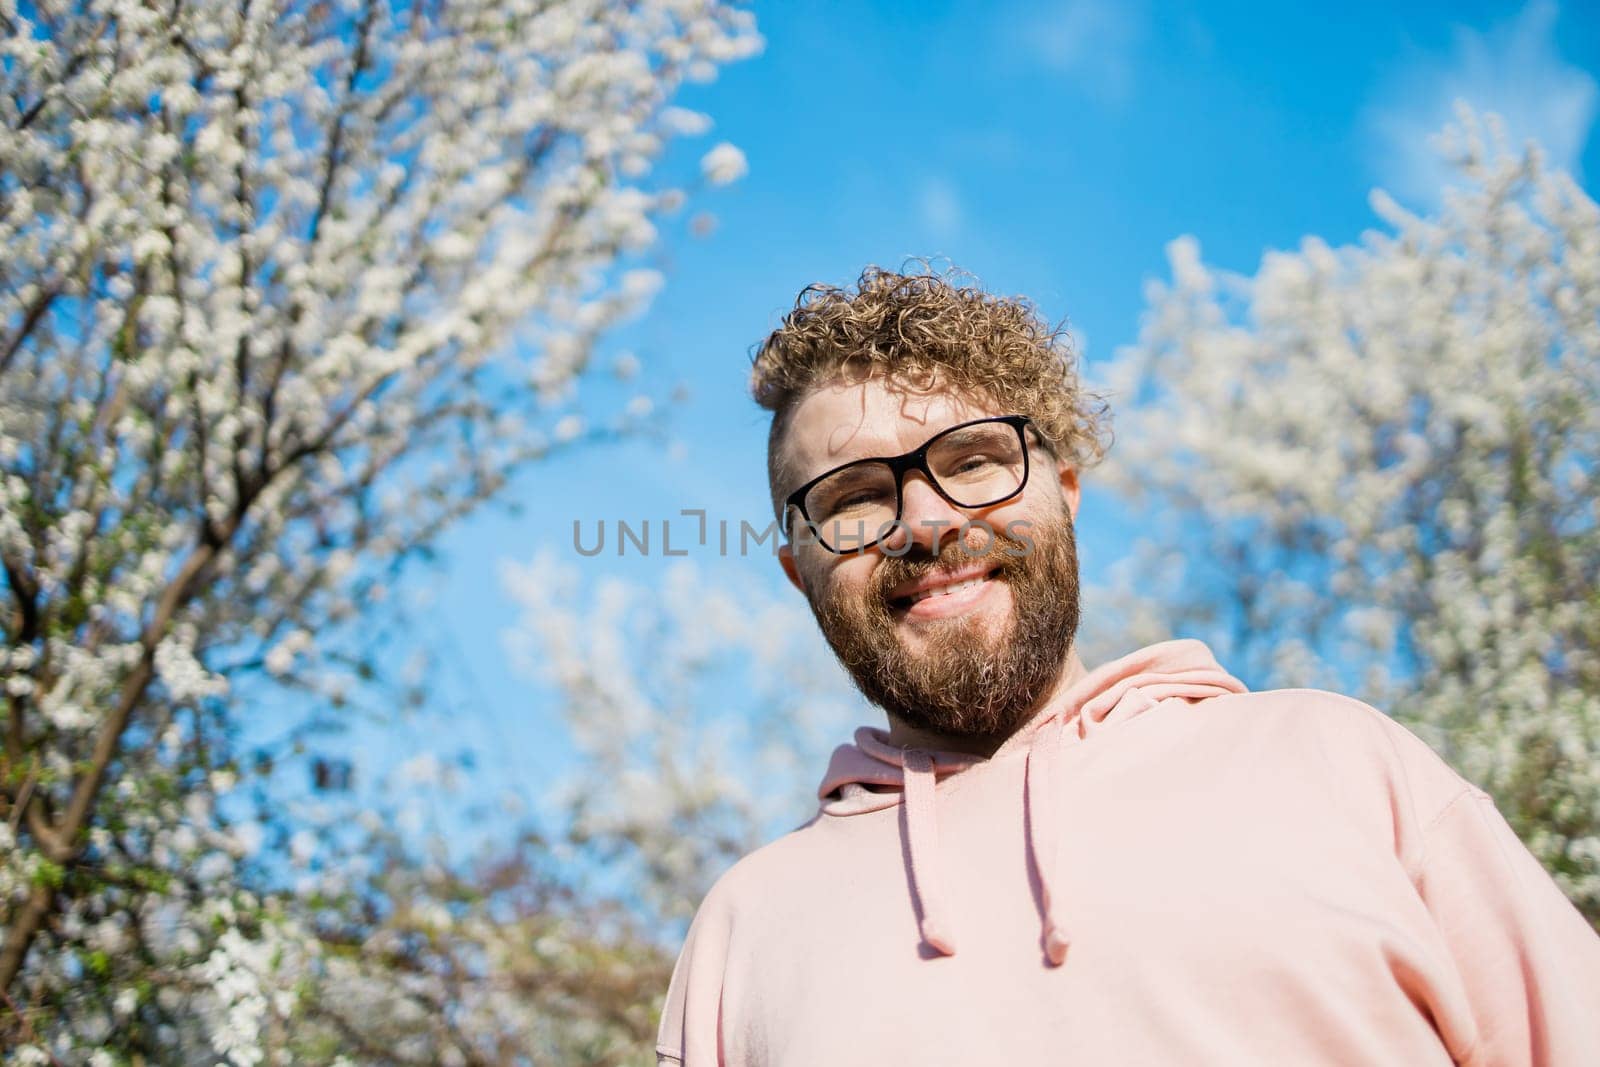 Handsome man outdoors portrait on background cherry blossoms or apple blossoms and blue spring sky. Millennial generation guy and new masculinity